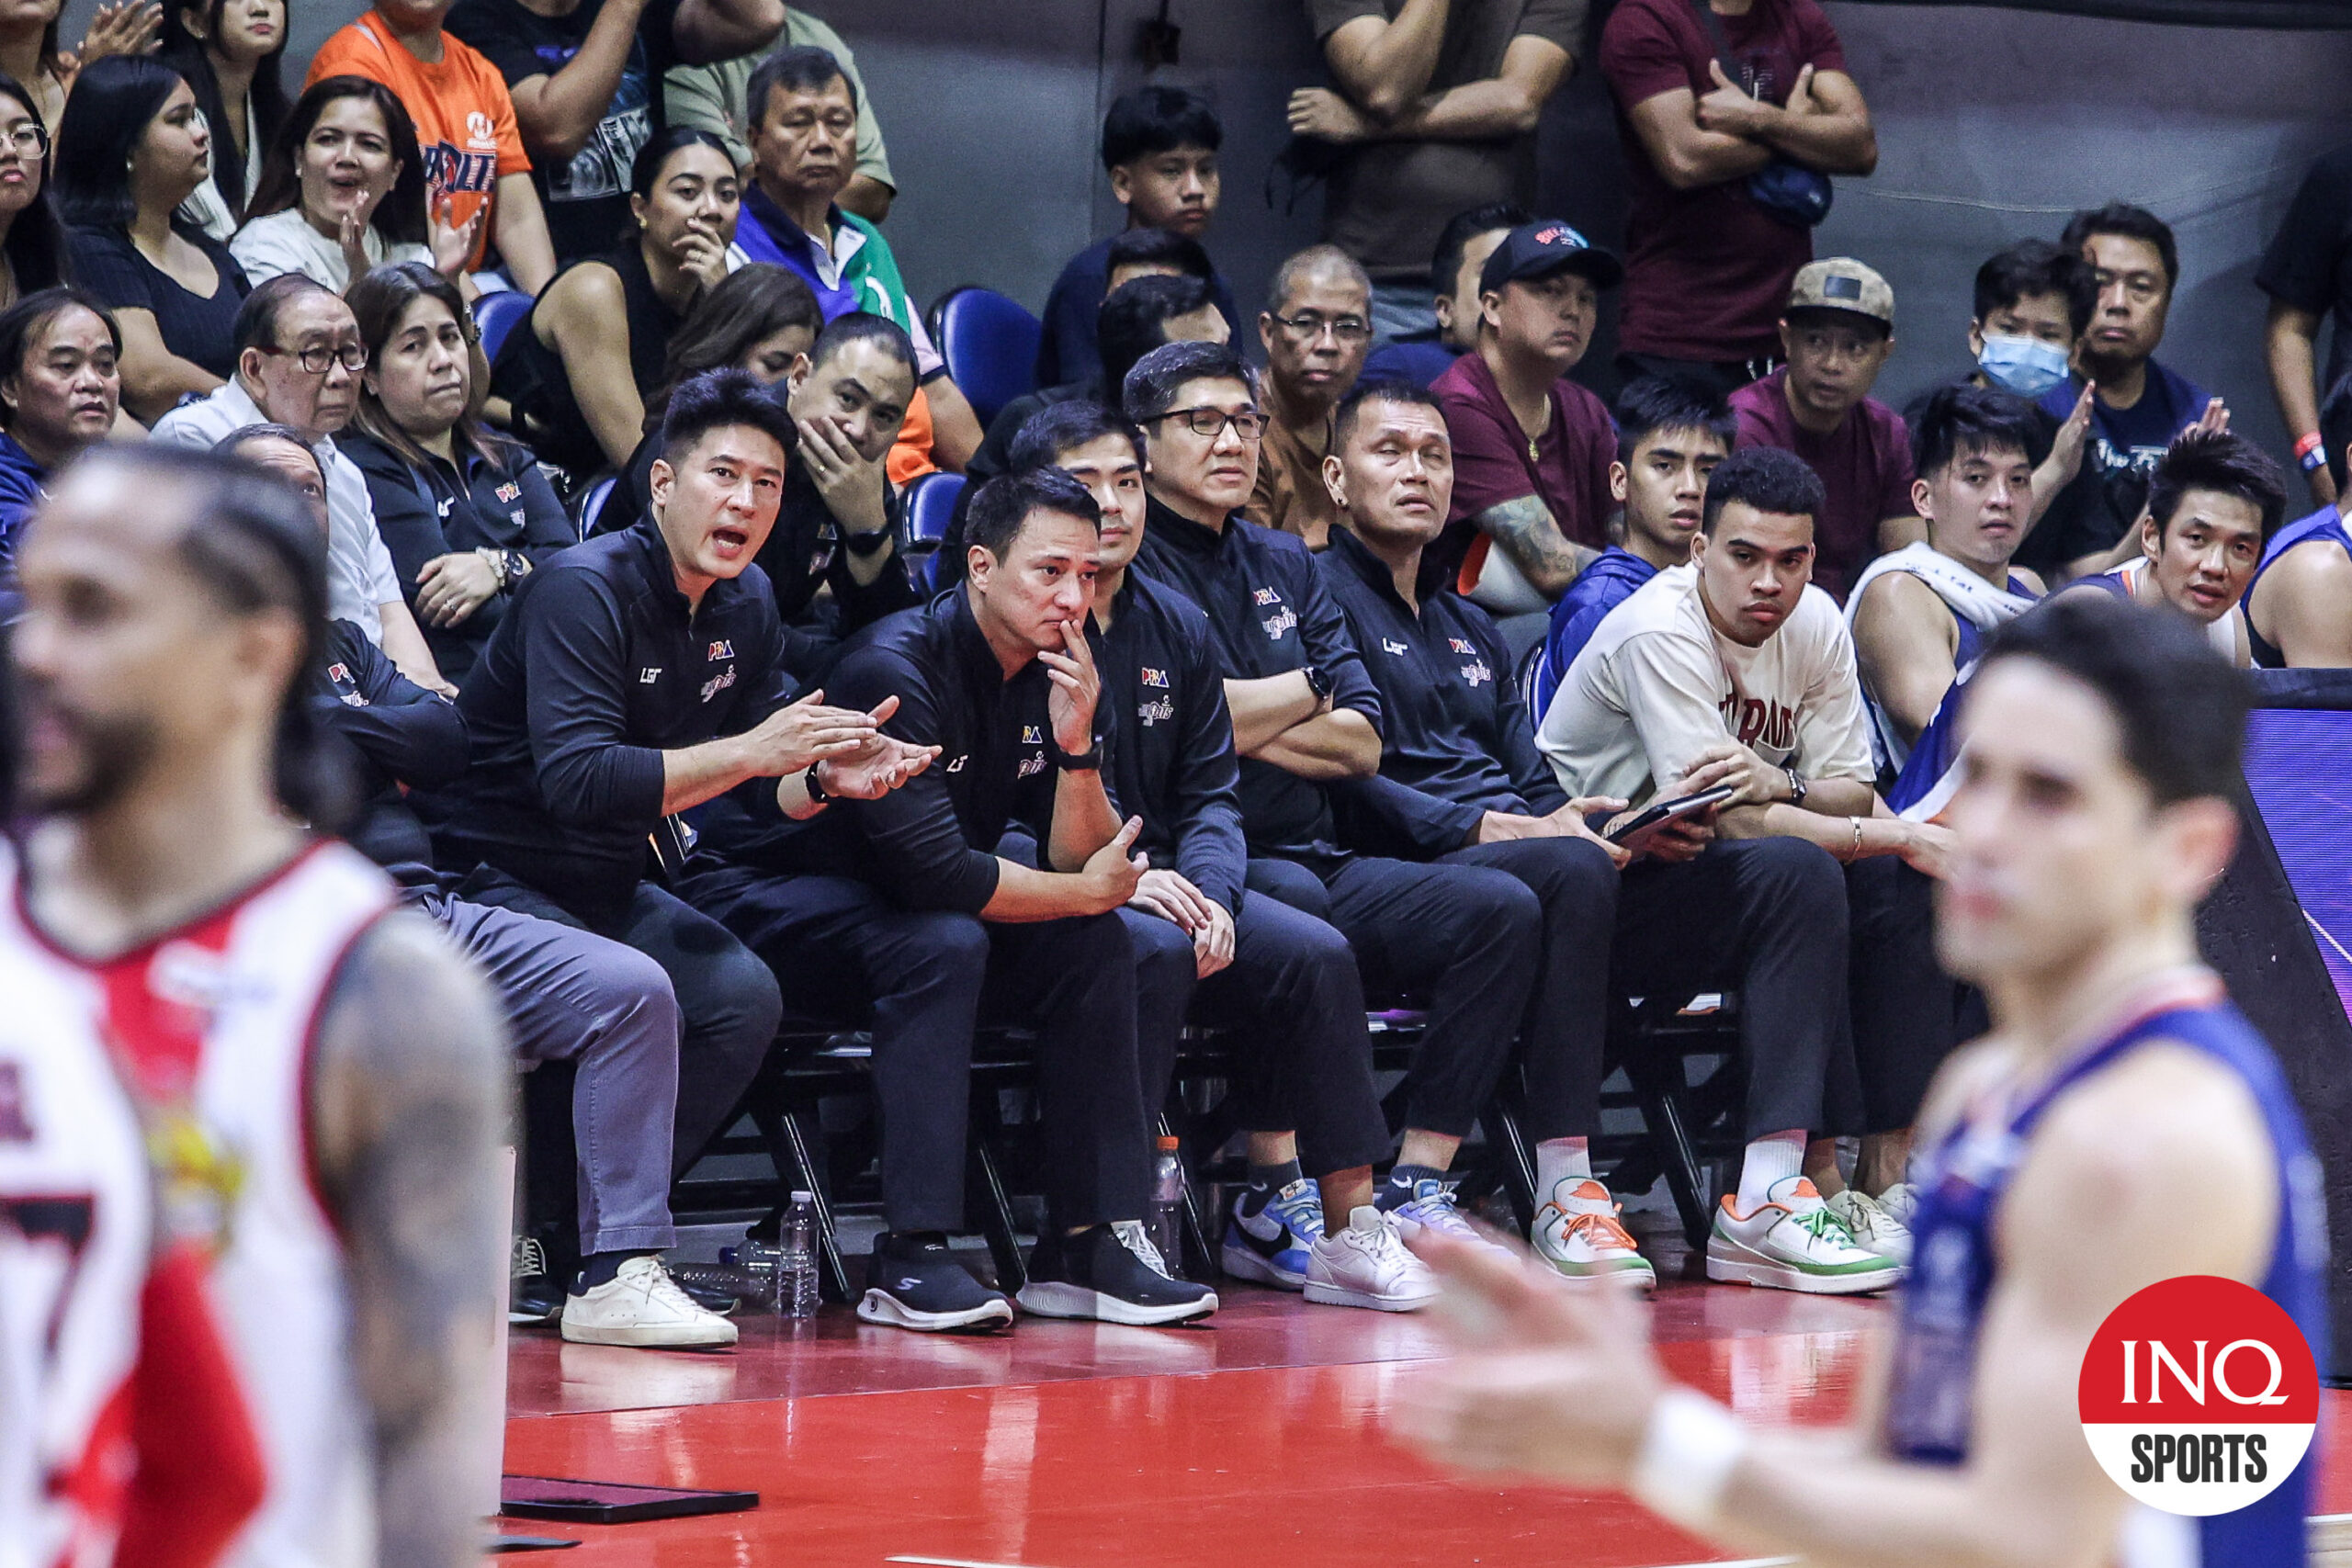 Coach Luigi Trillo at the Meralco Bolts' bench during the PBA Philippine Cup Finals against San Miguel Beermen.